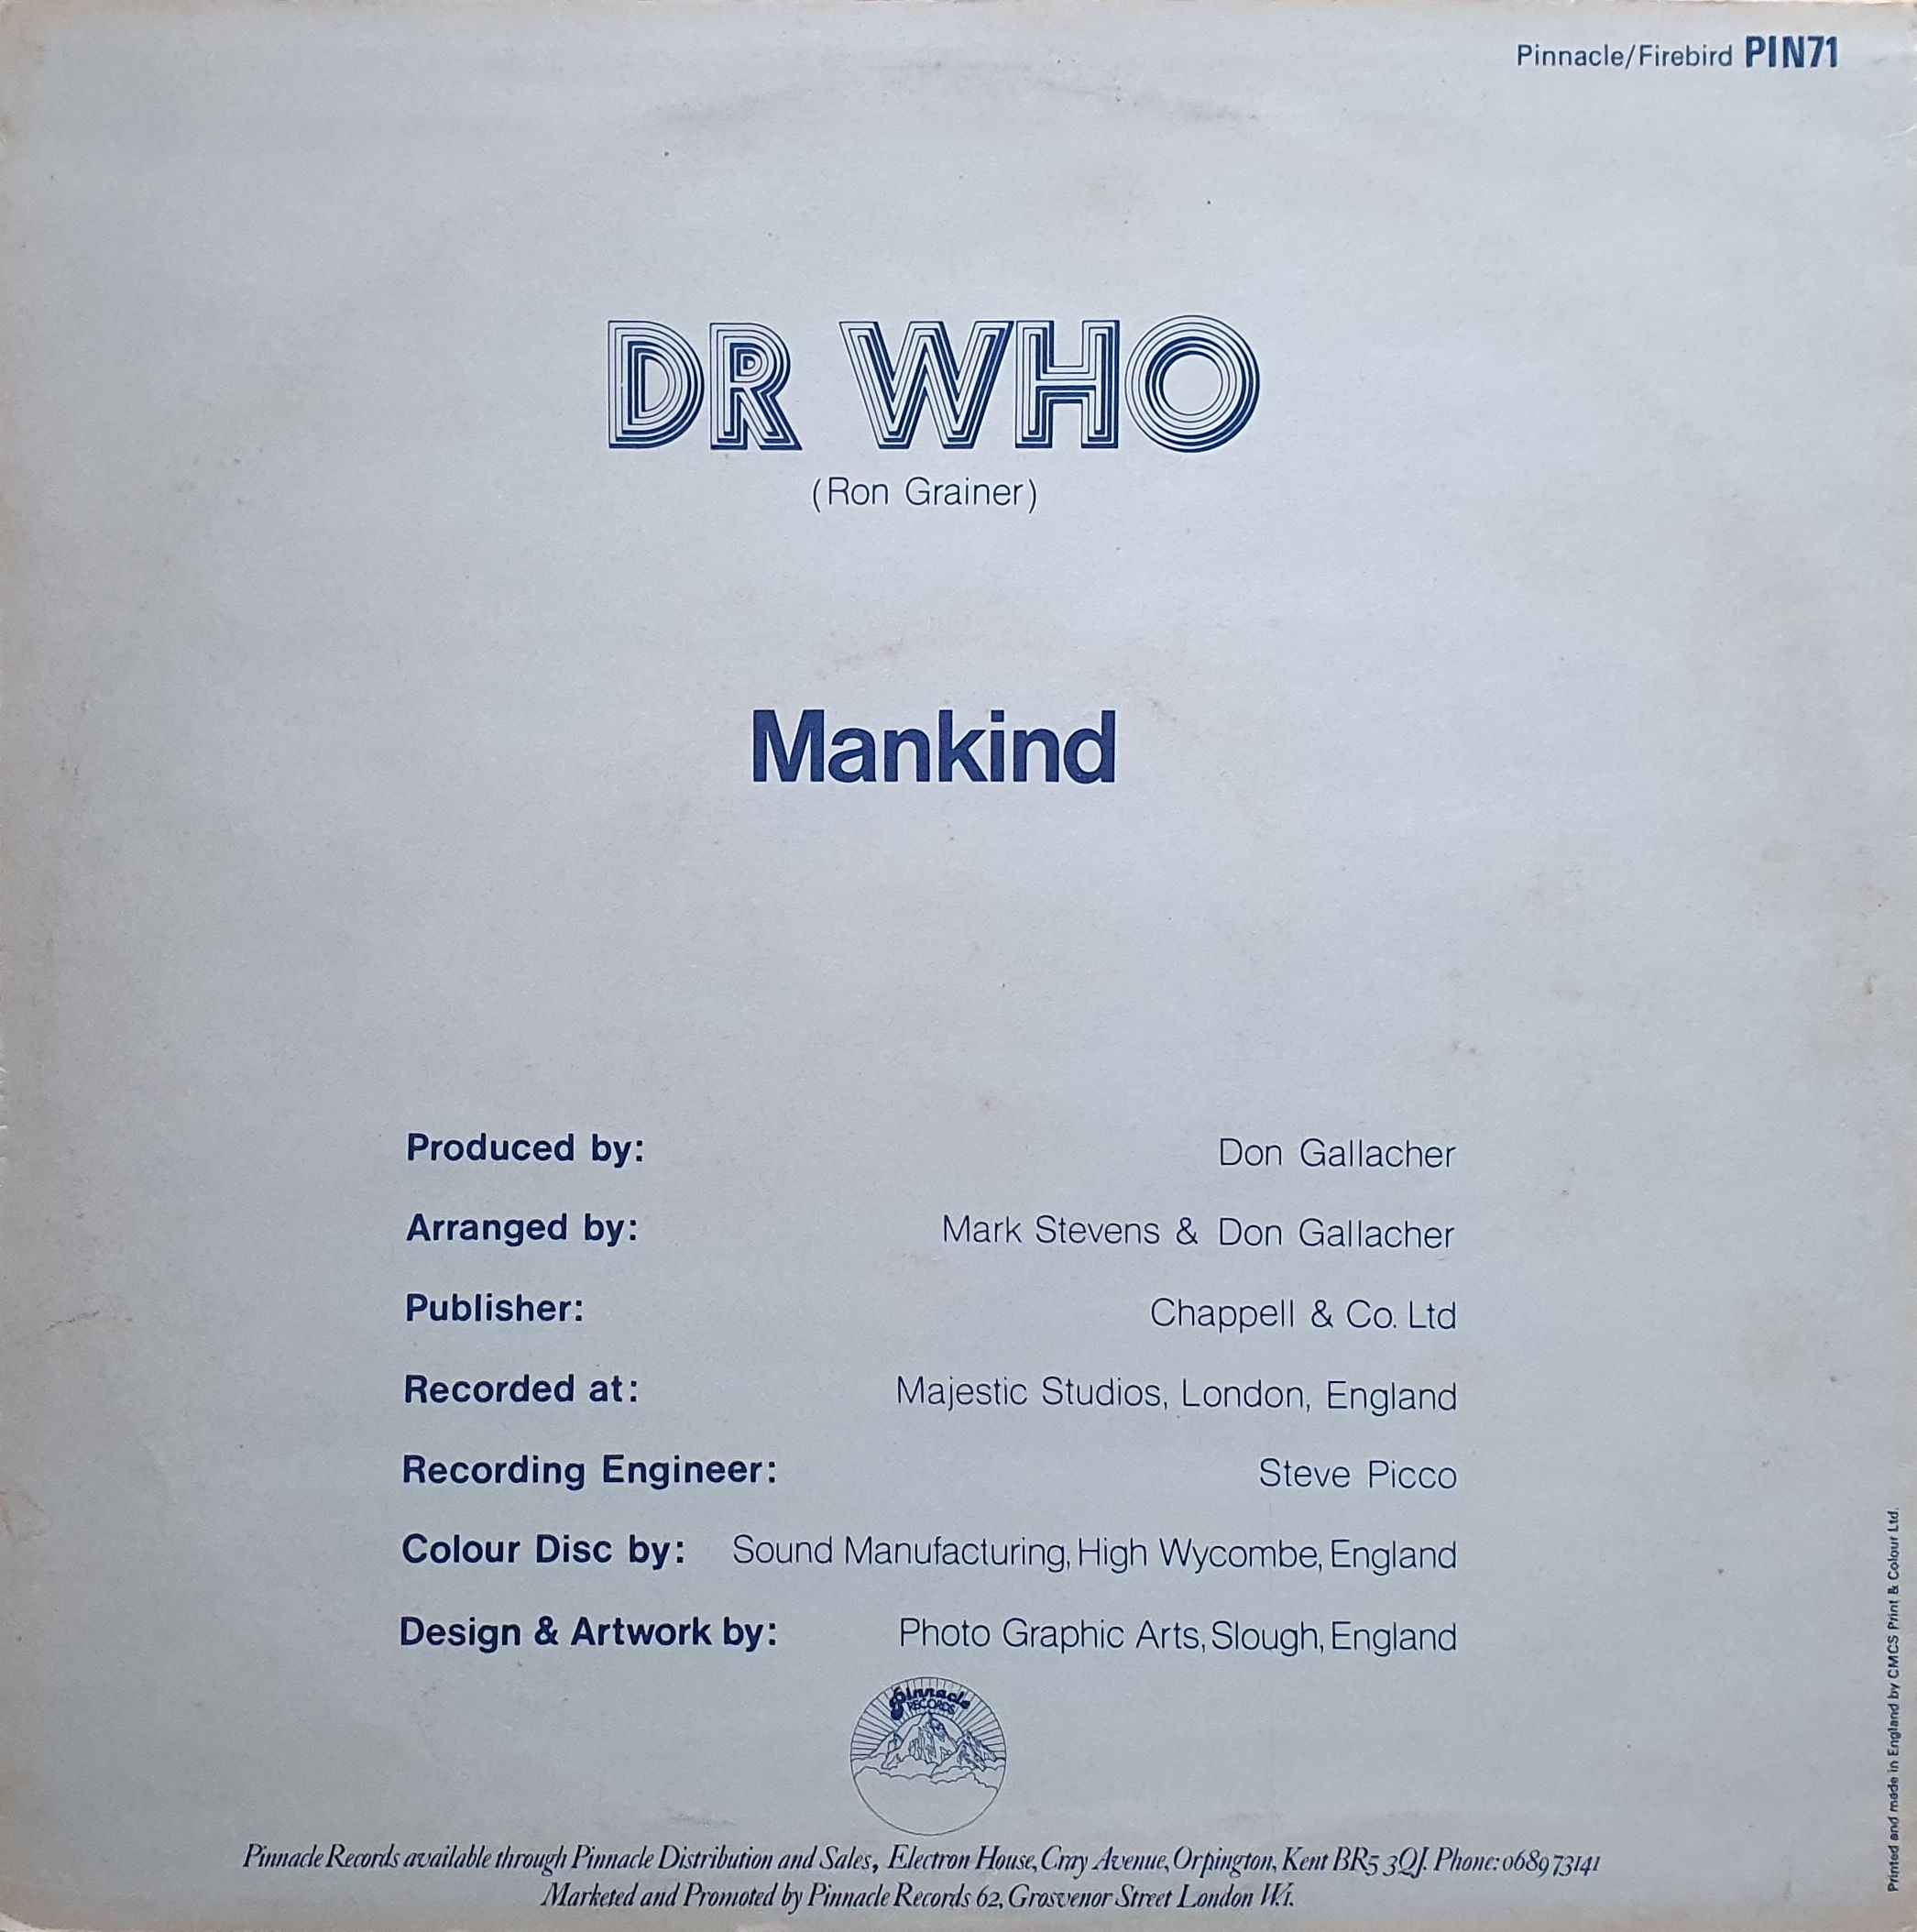 Picture of PIN 71-12 GR Doctor Who (Cosmic remix) by artist Ron Grainer / Mark Stevens / Mankind from the BBC records and Tapes library